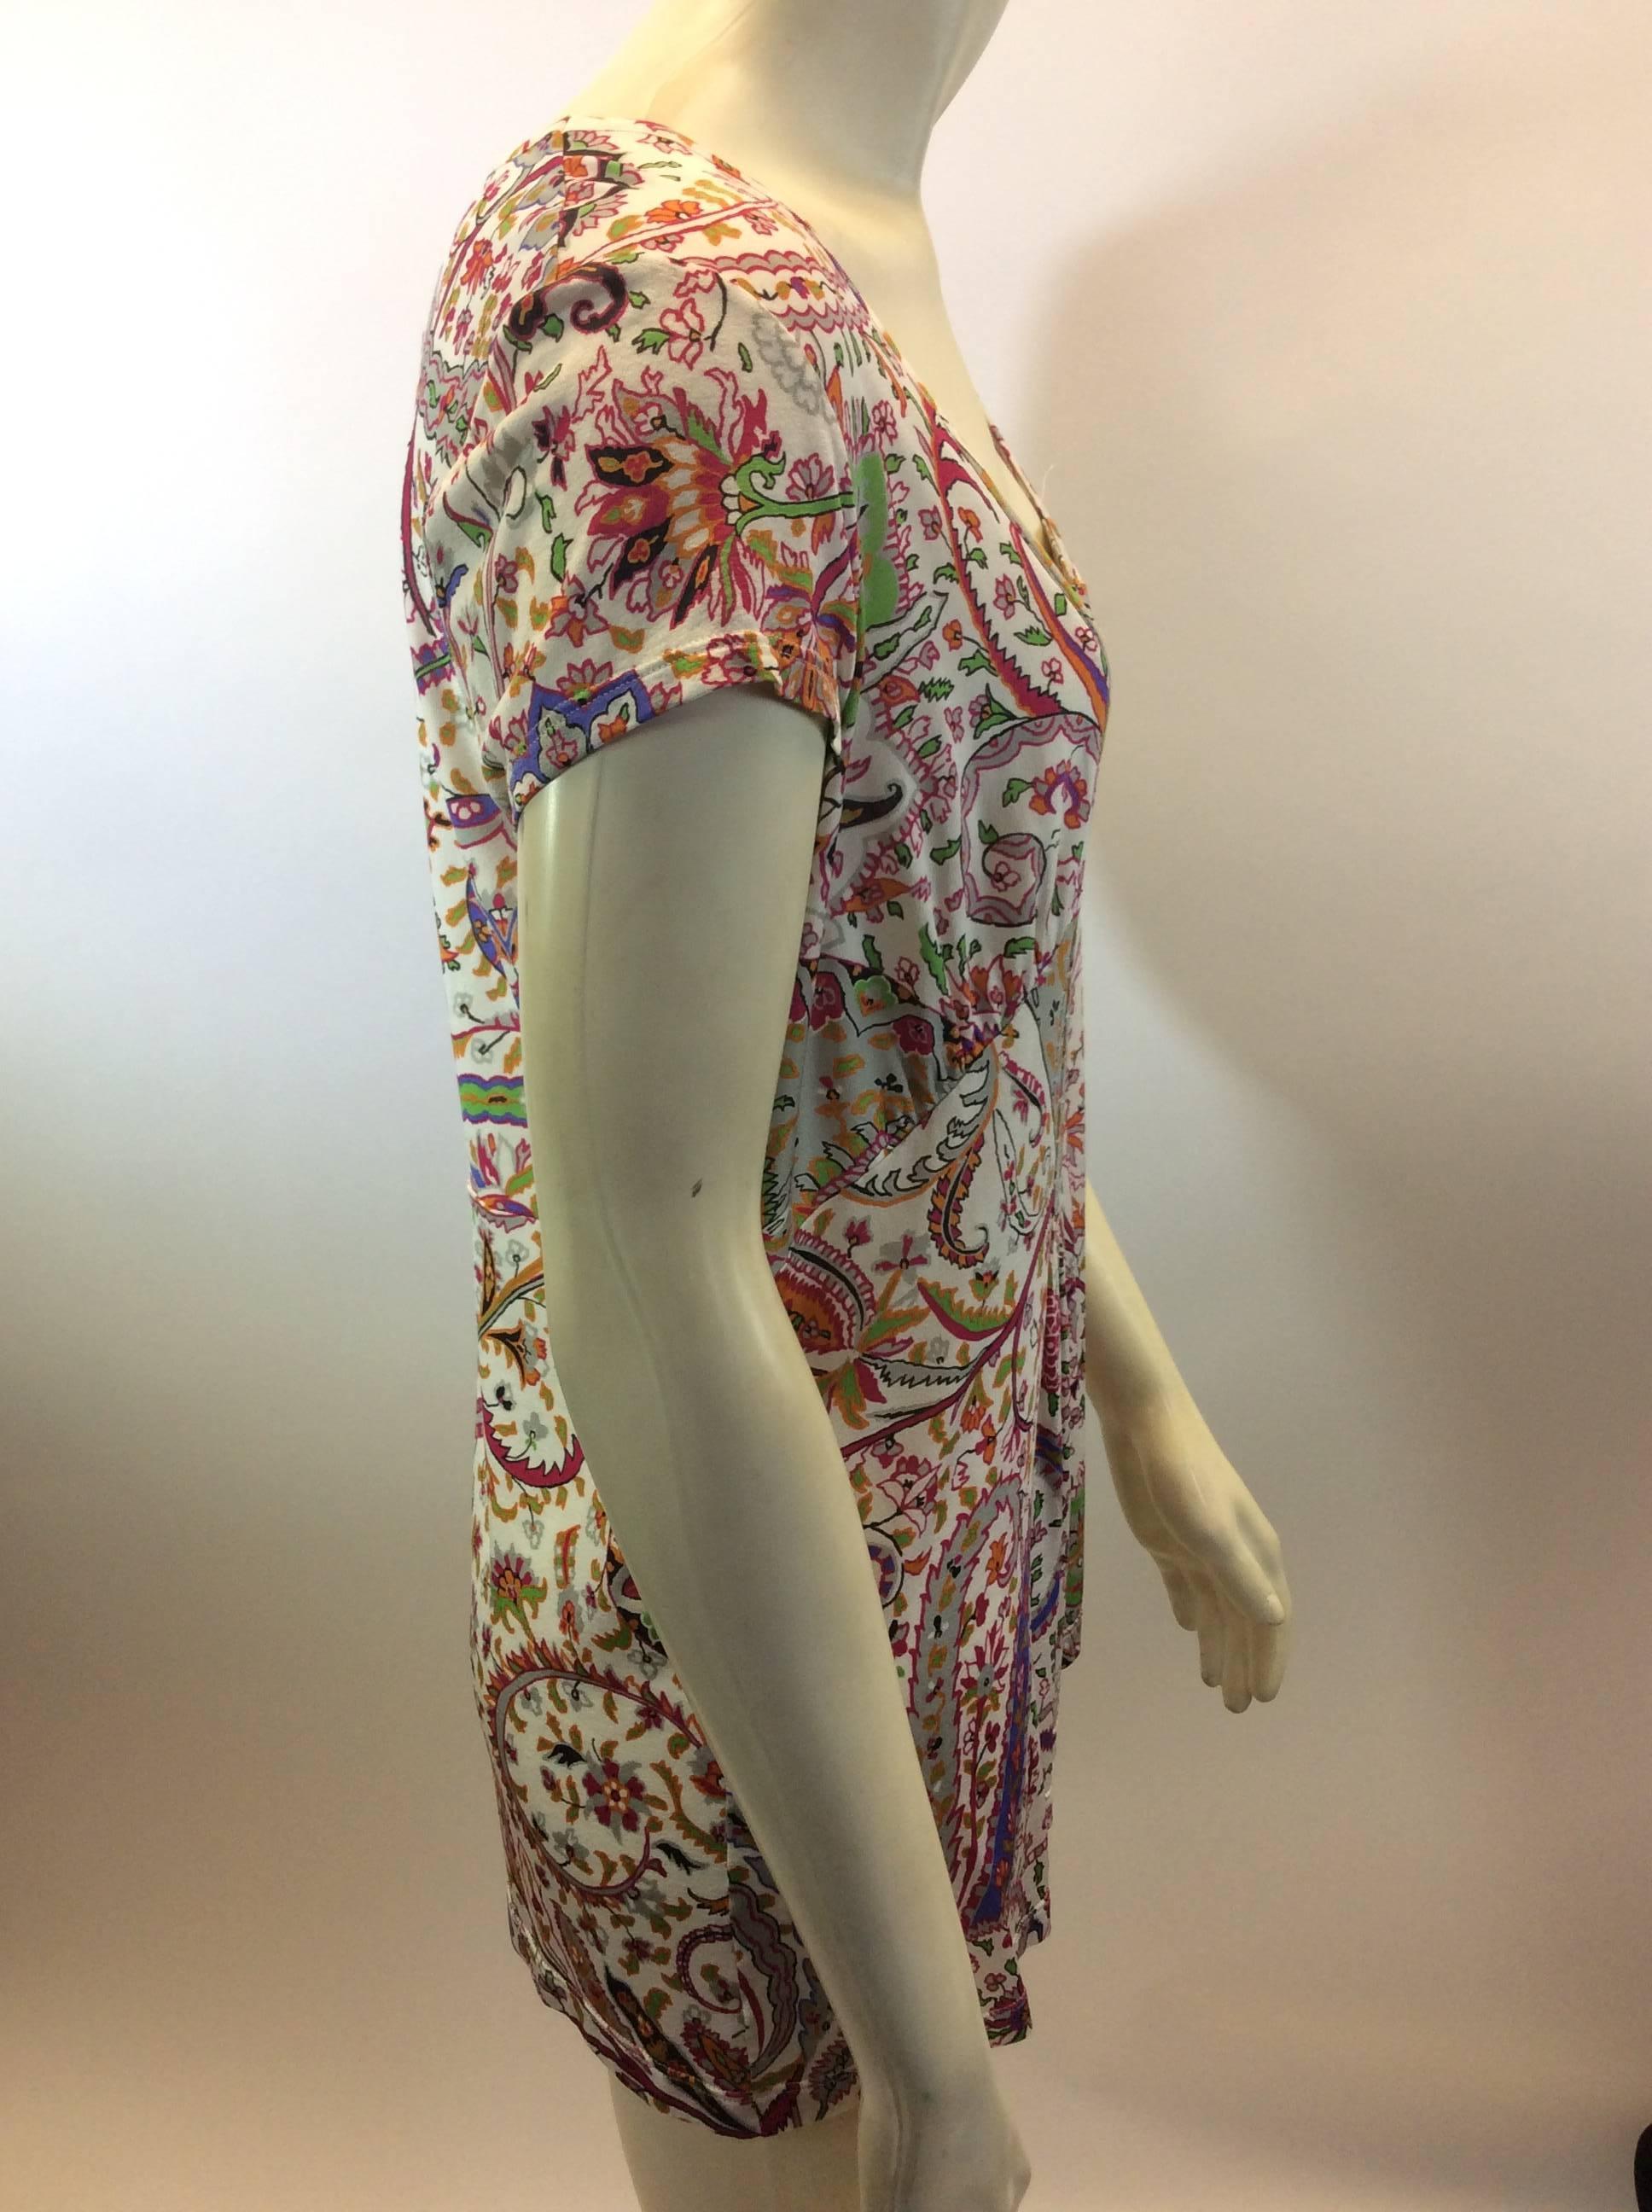 Etro Floral Print Pleated Blouse In Excellent Condition For Sale In Narberth, PA